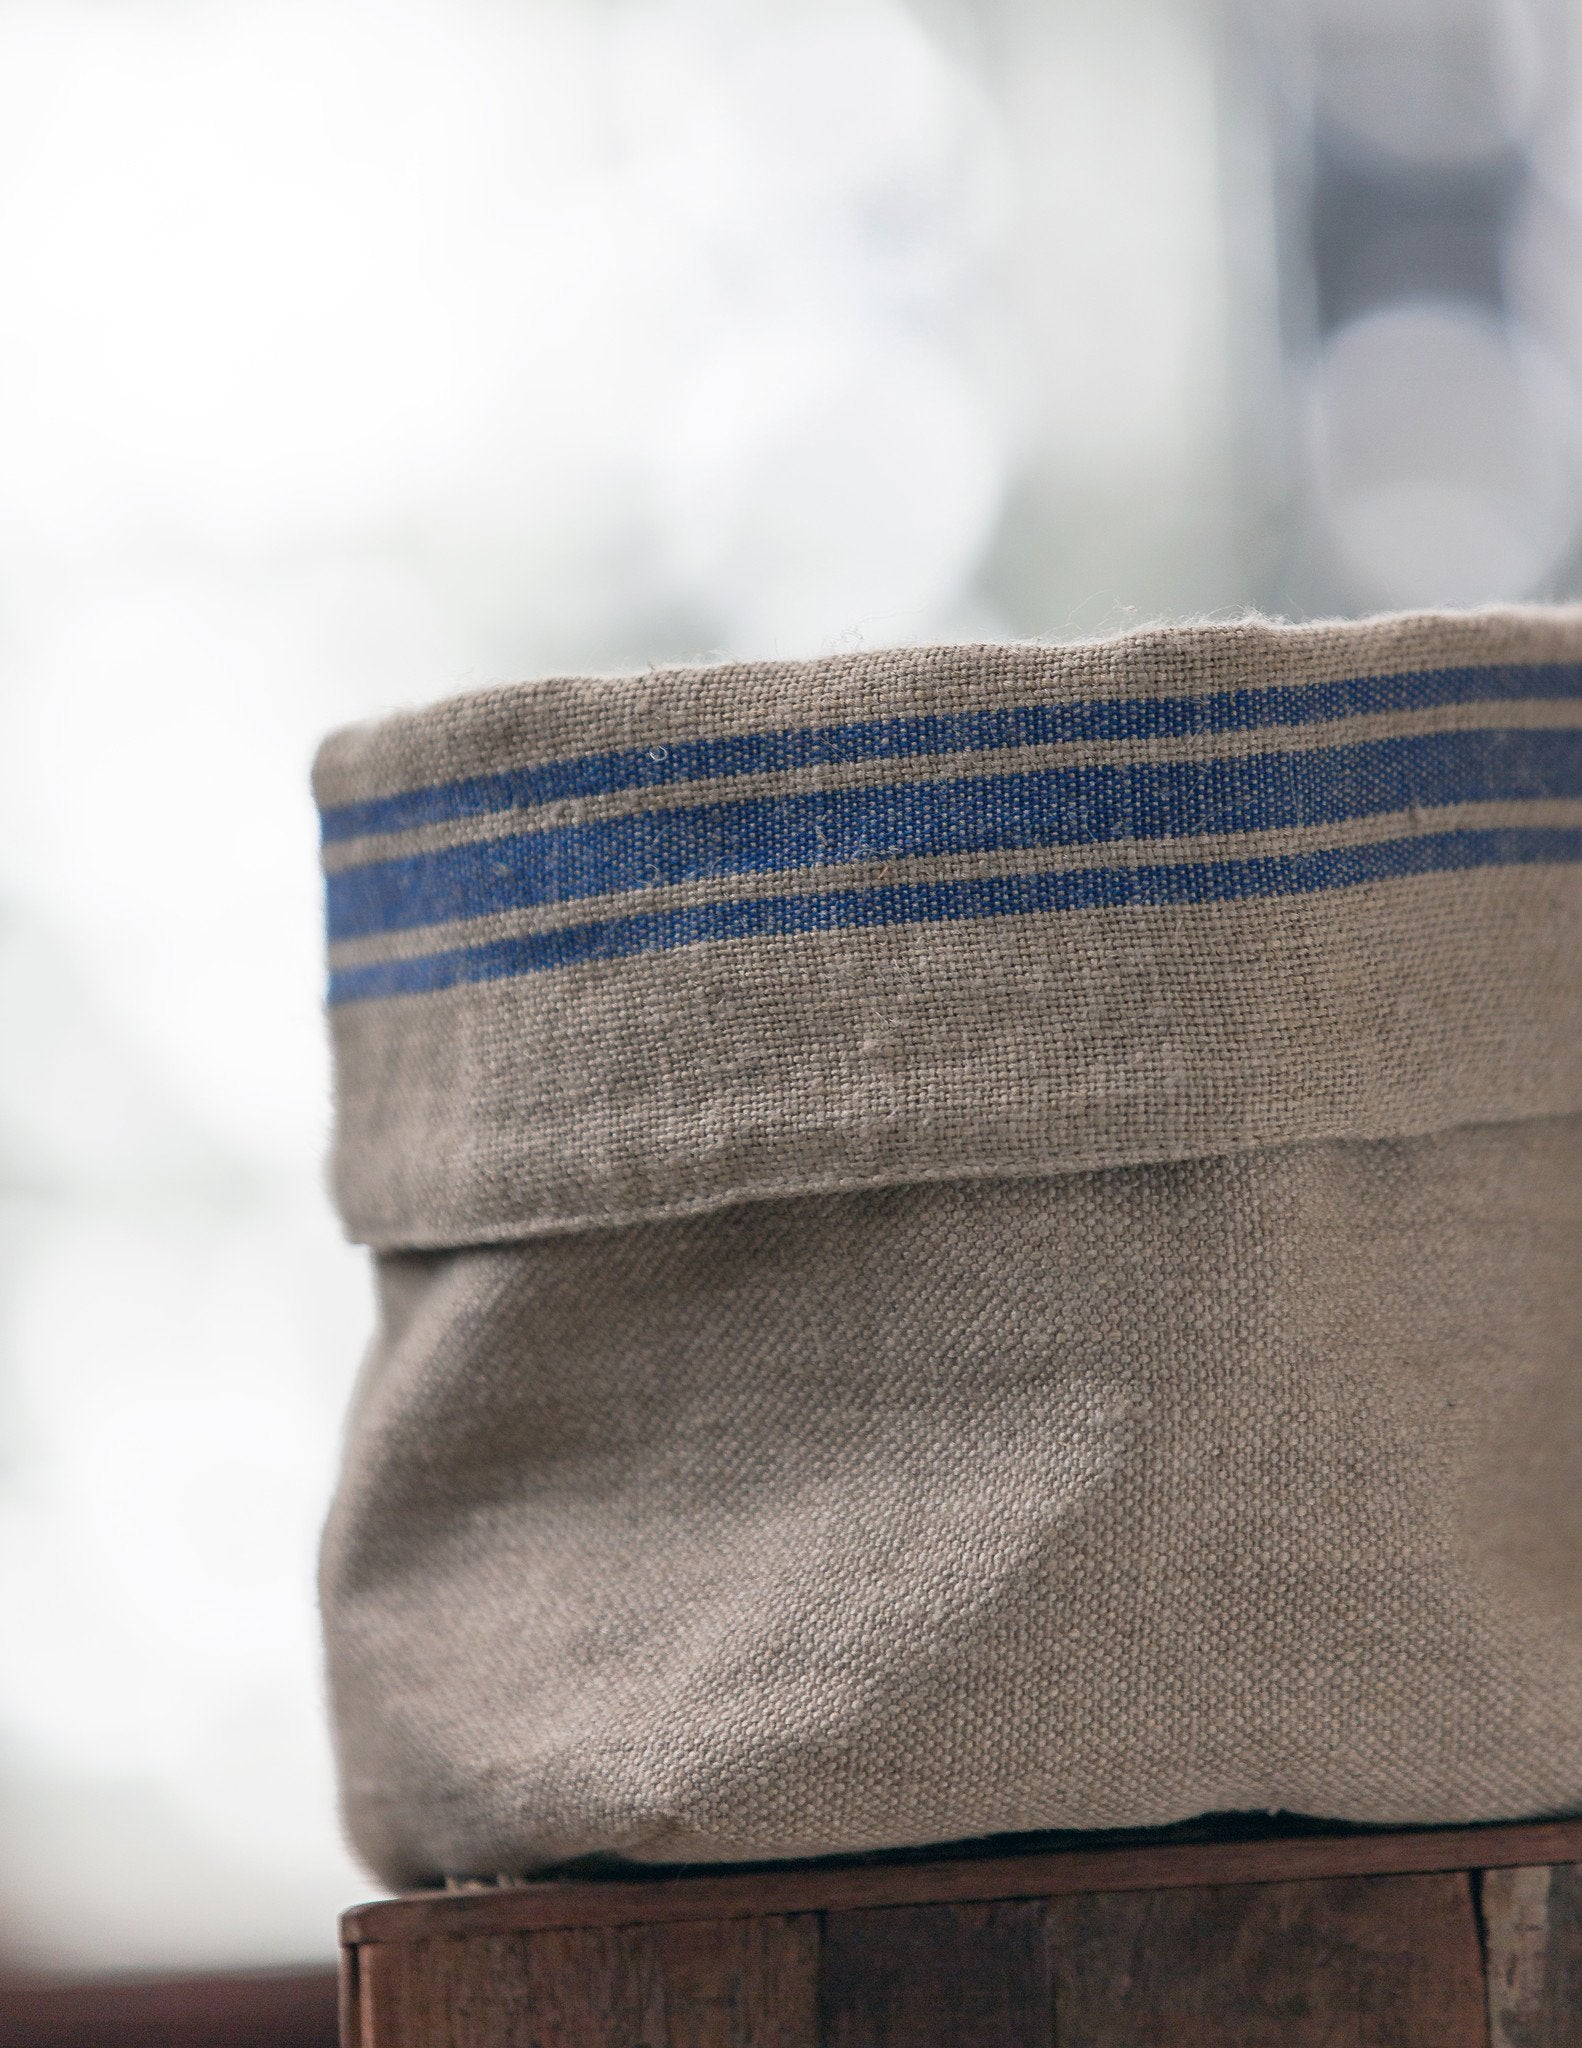 Thieffry Blue Monogramme Linen Bread Bag - French Dry Goods